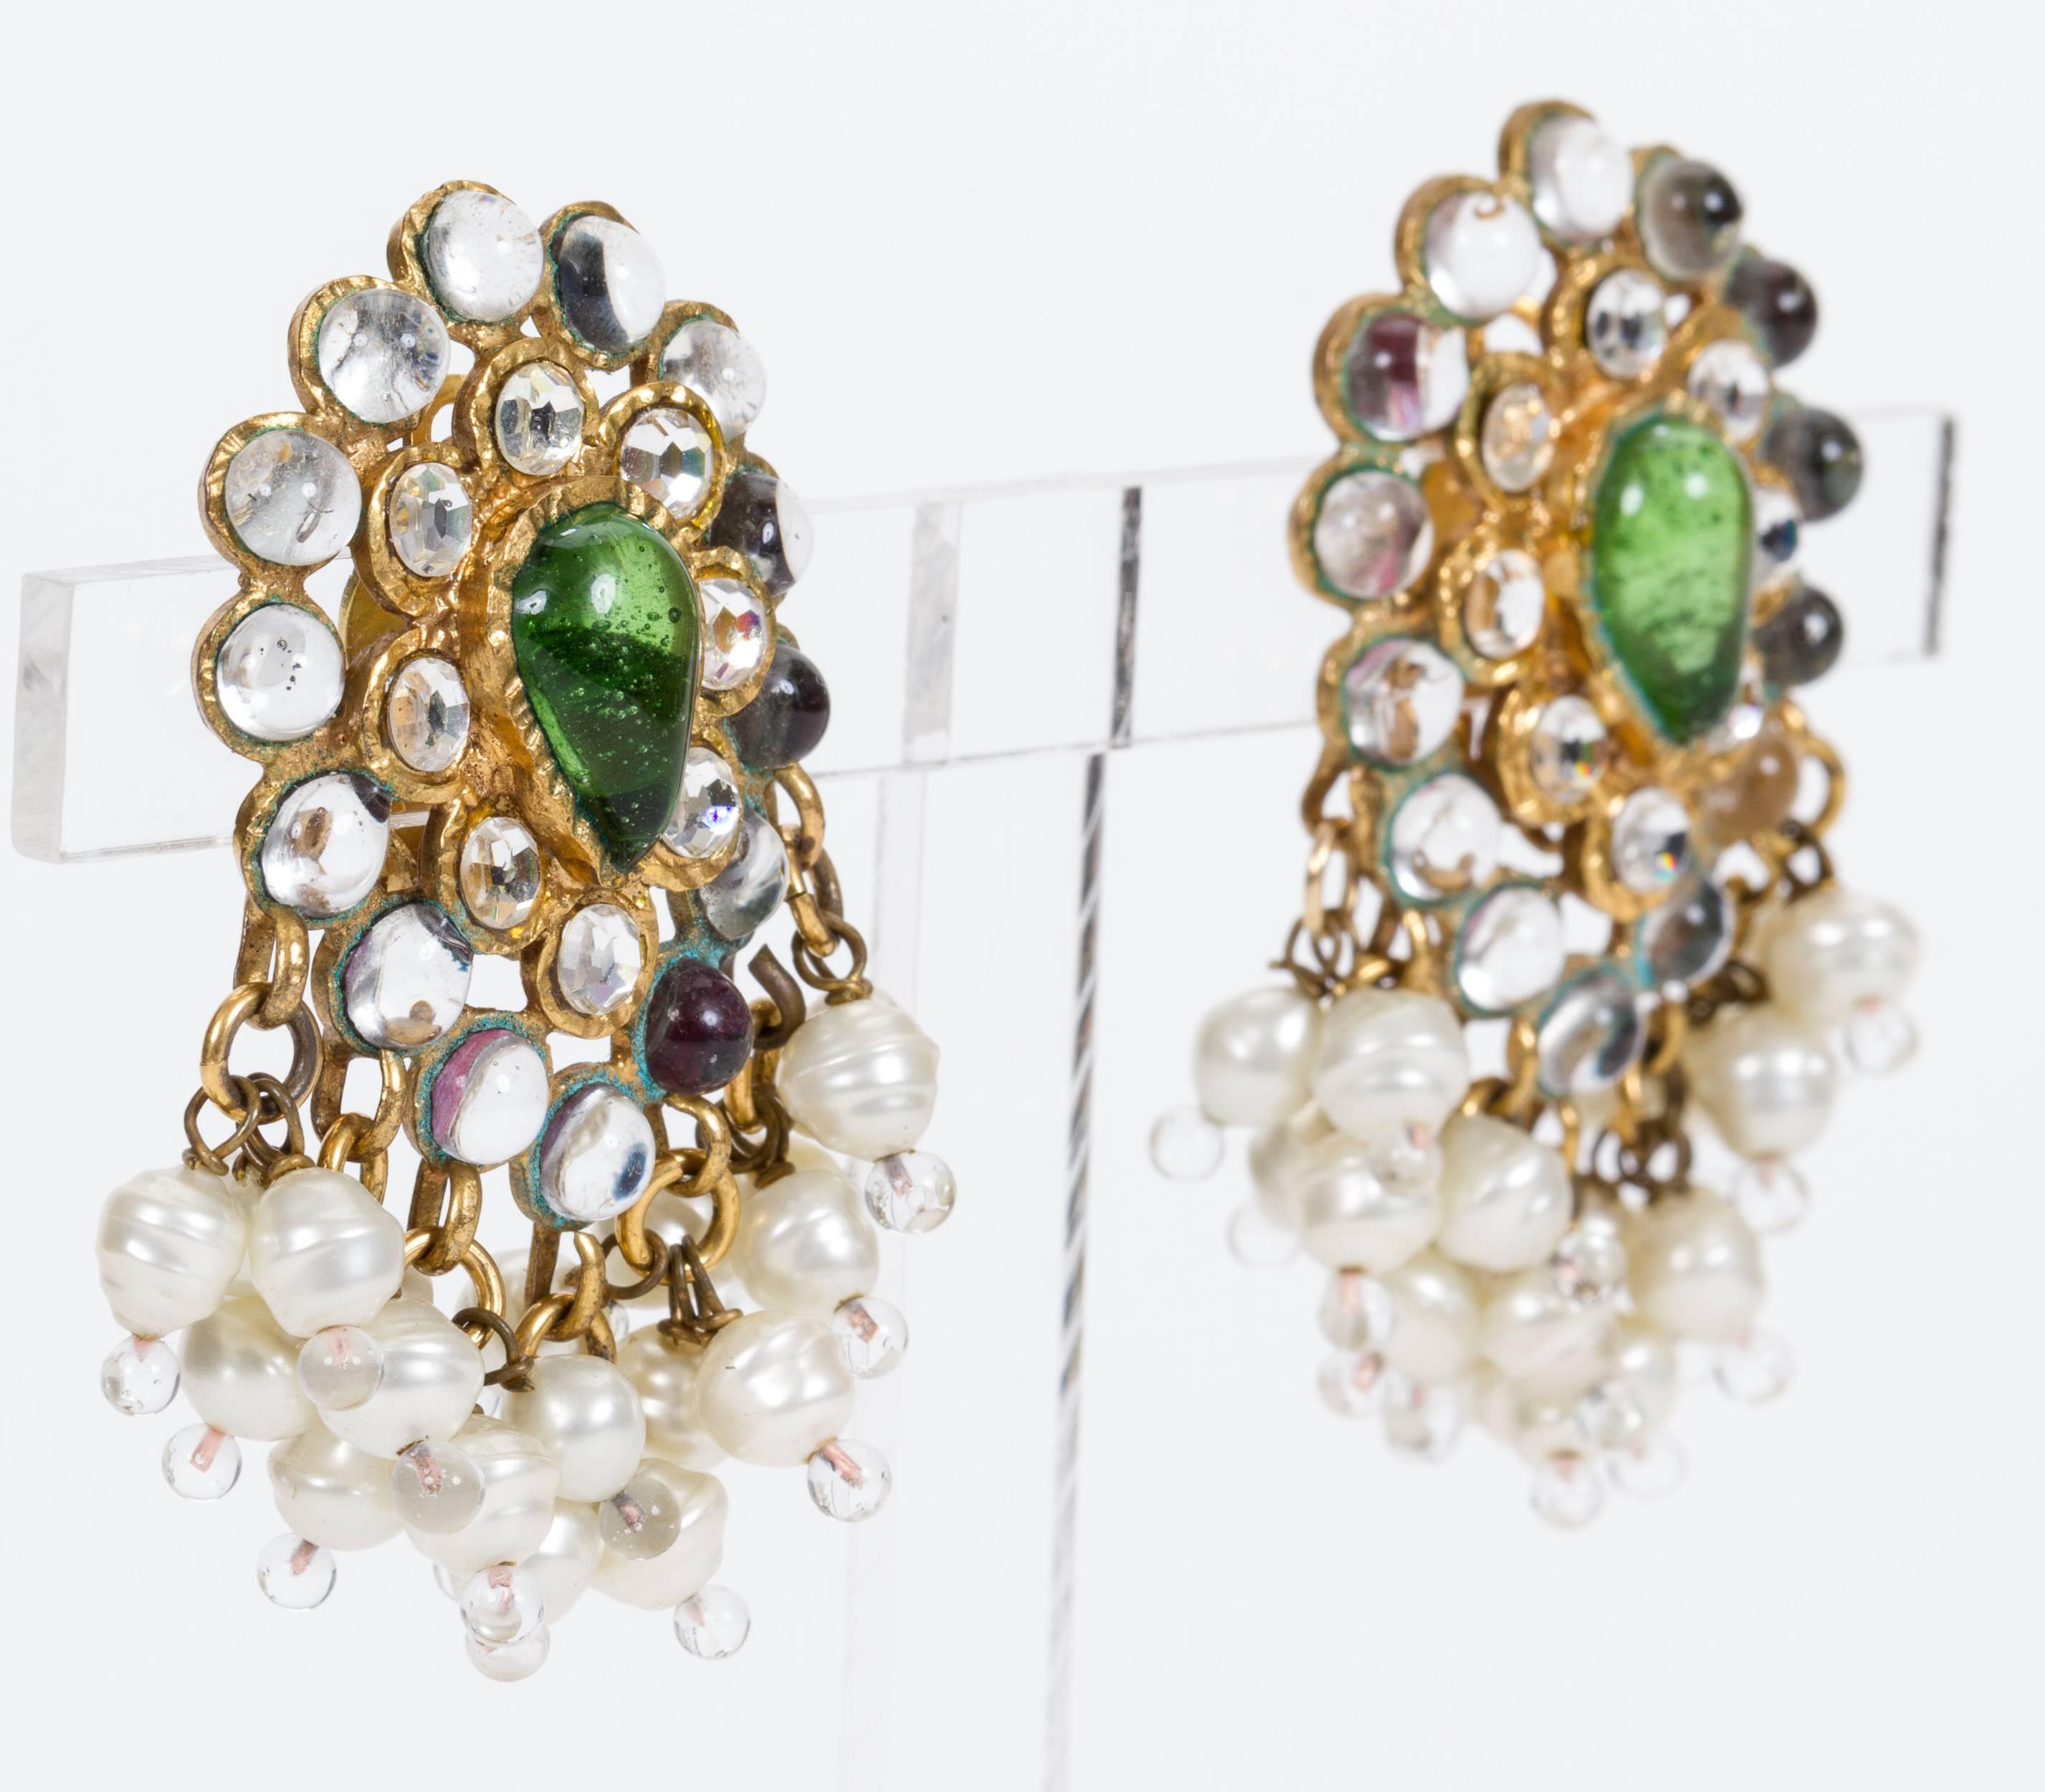 Chanel 70s Indian style rare gripoix dangle earrings. Celeste and green gripoix and faux pearl dangles. Come with original box.